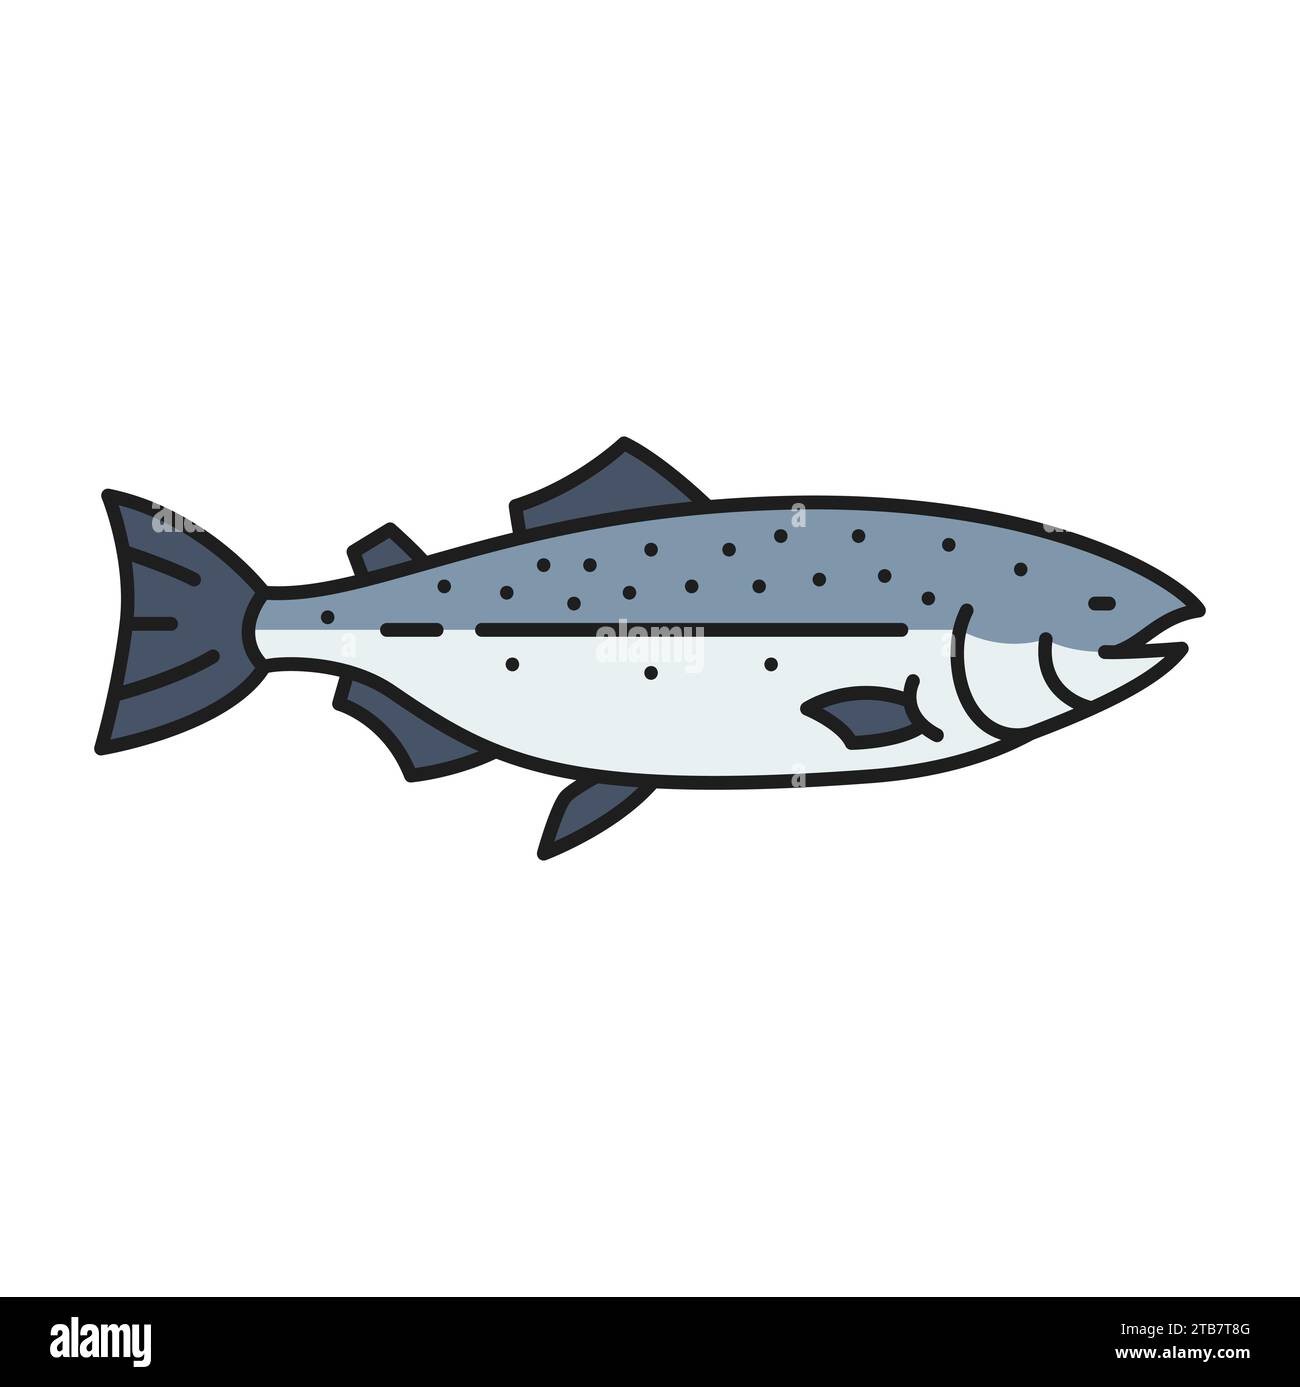 Fishing industry salmon or trout fish outline icon. Seafood shop,  restaurant meat or gourmet menu or fresh fish market outline vector icon.  Fishing company thin line sign or symbol with salmon or